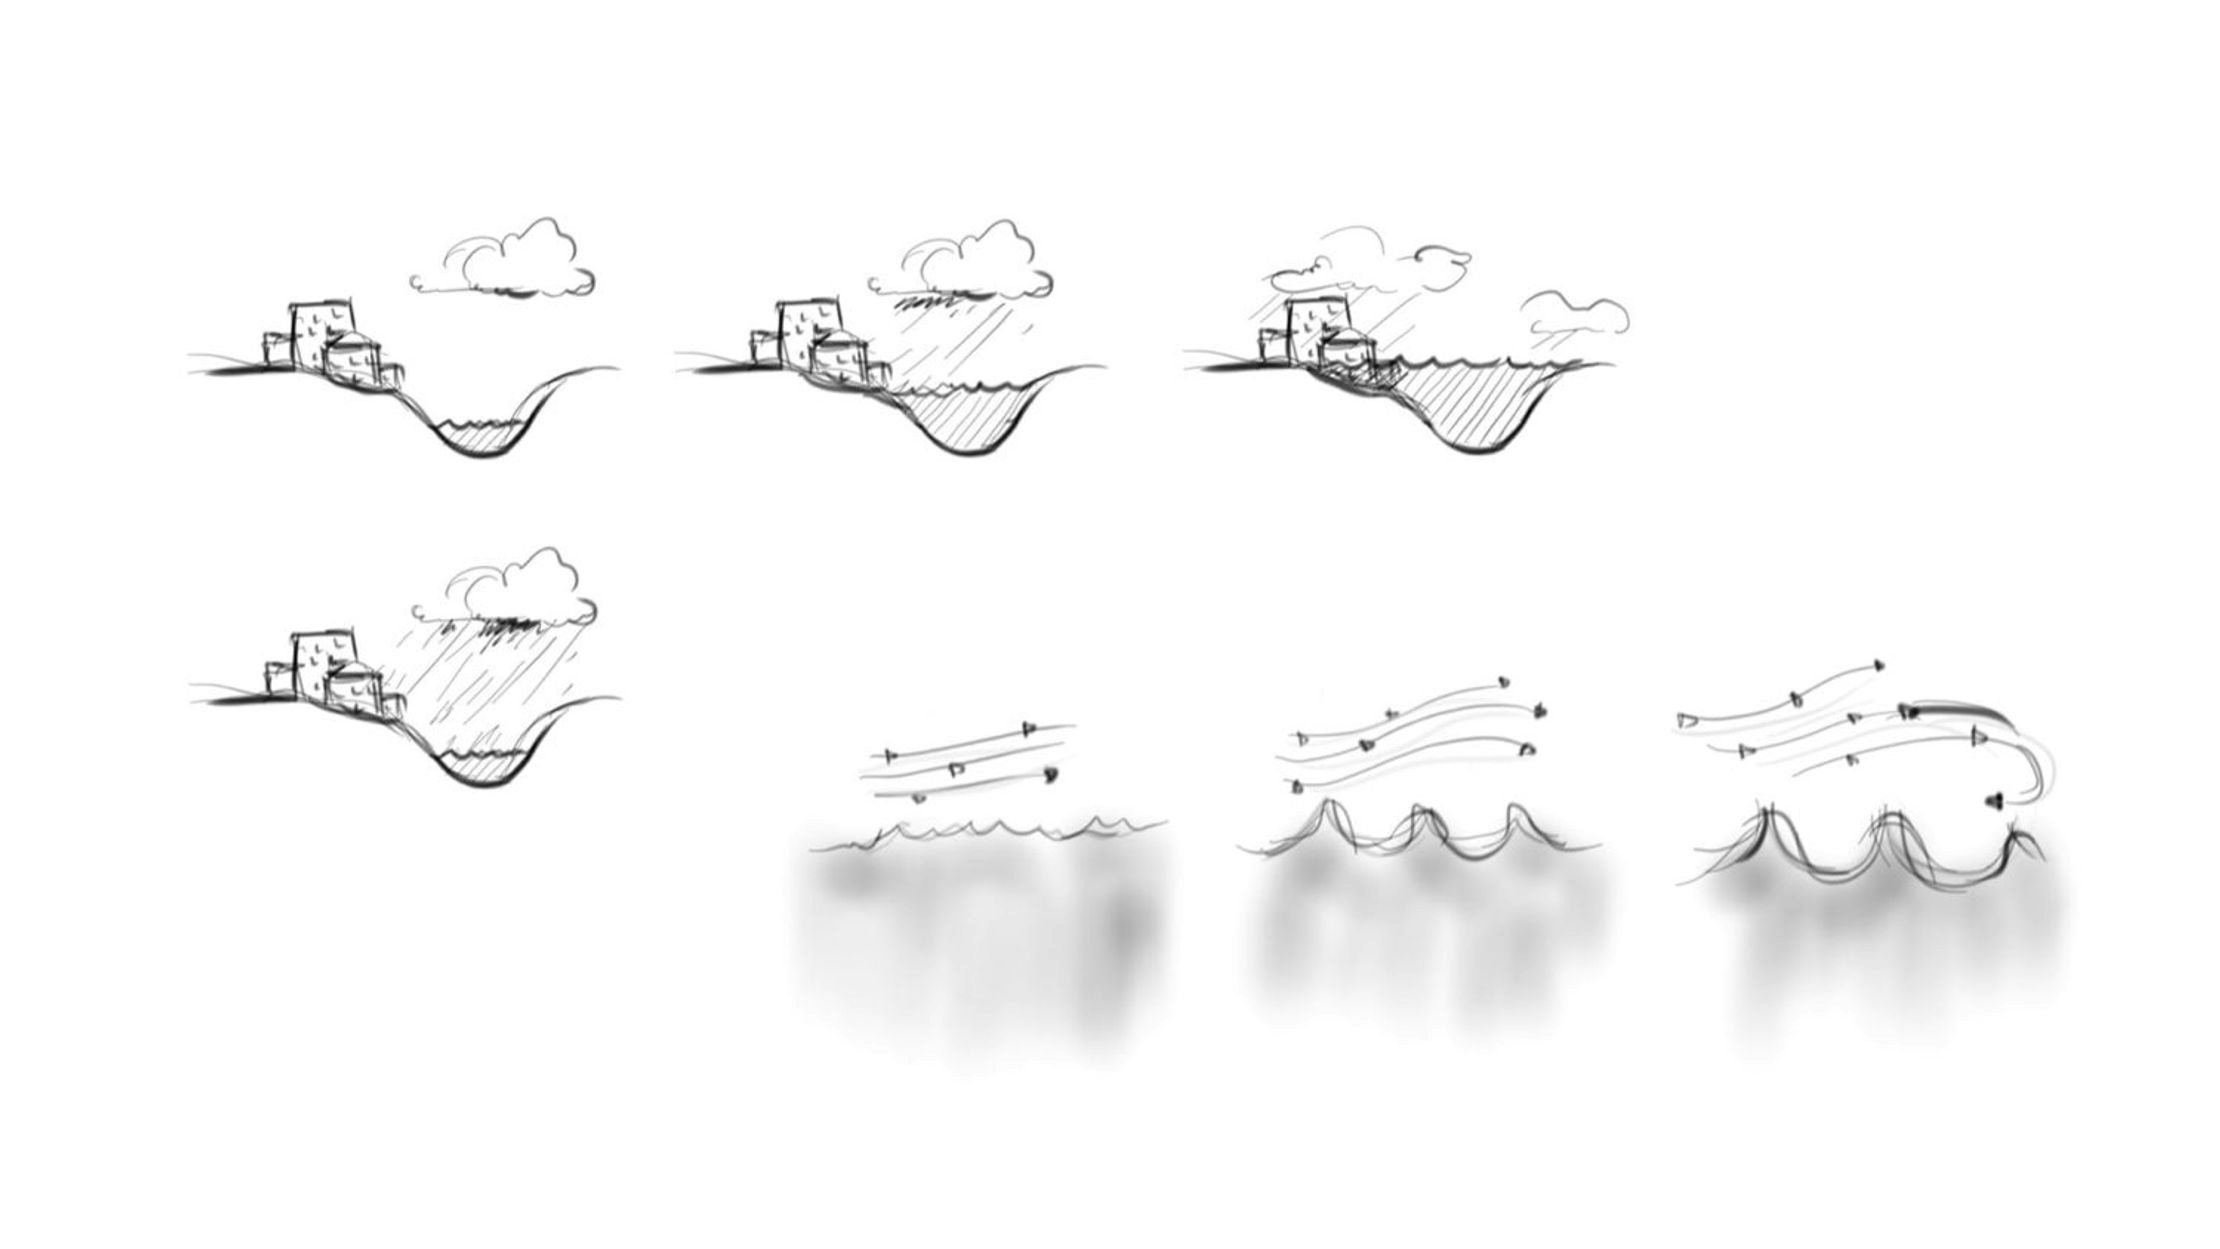 A sketch of how to draw cross sections of weather for the ECMWF graphics. One sketch shows the progression of cloud and rain over a city by a river. The other shows wind patterns whipping up waves on water. 